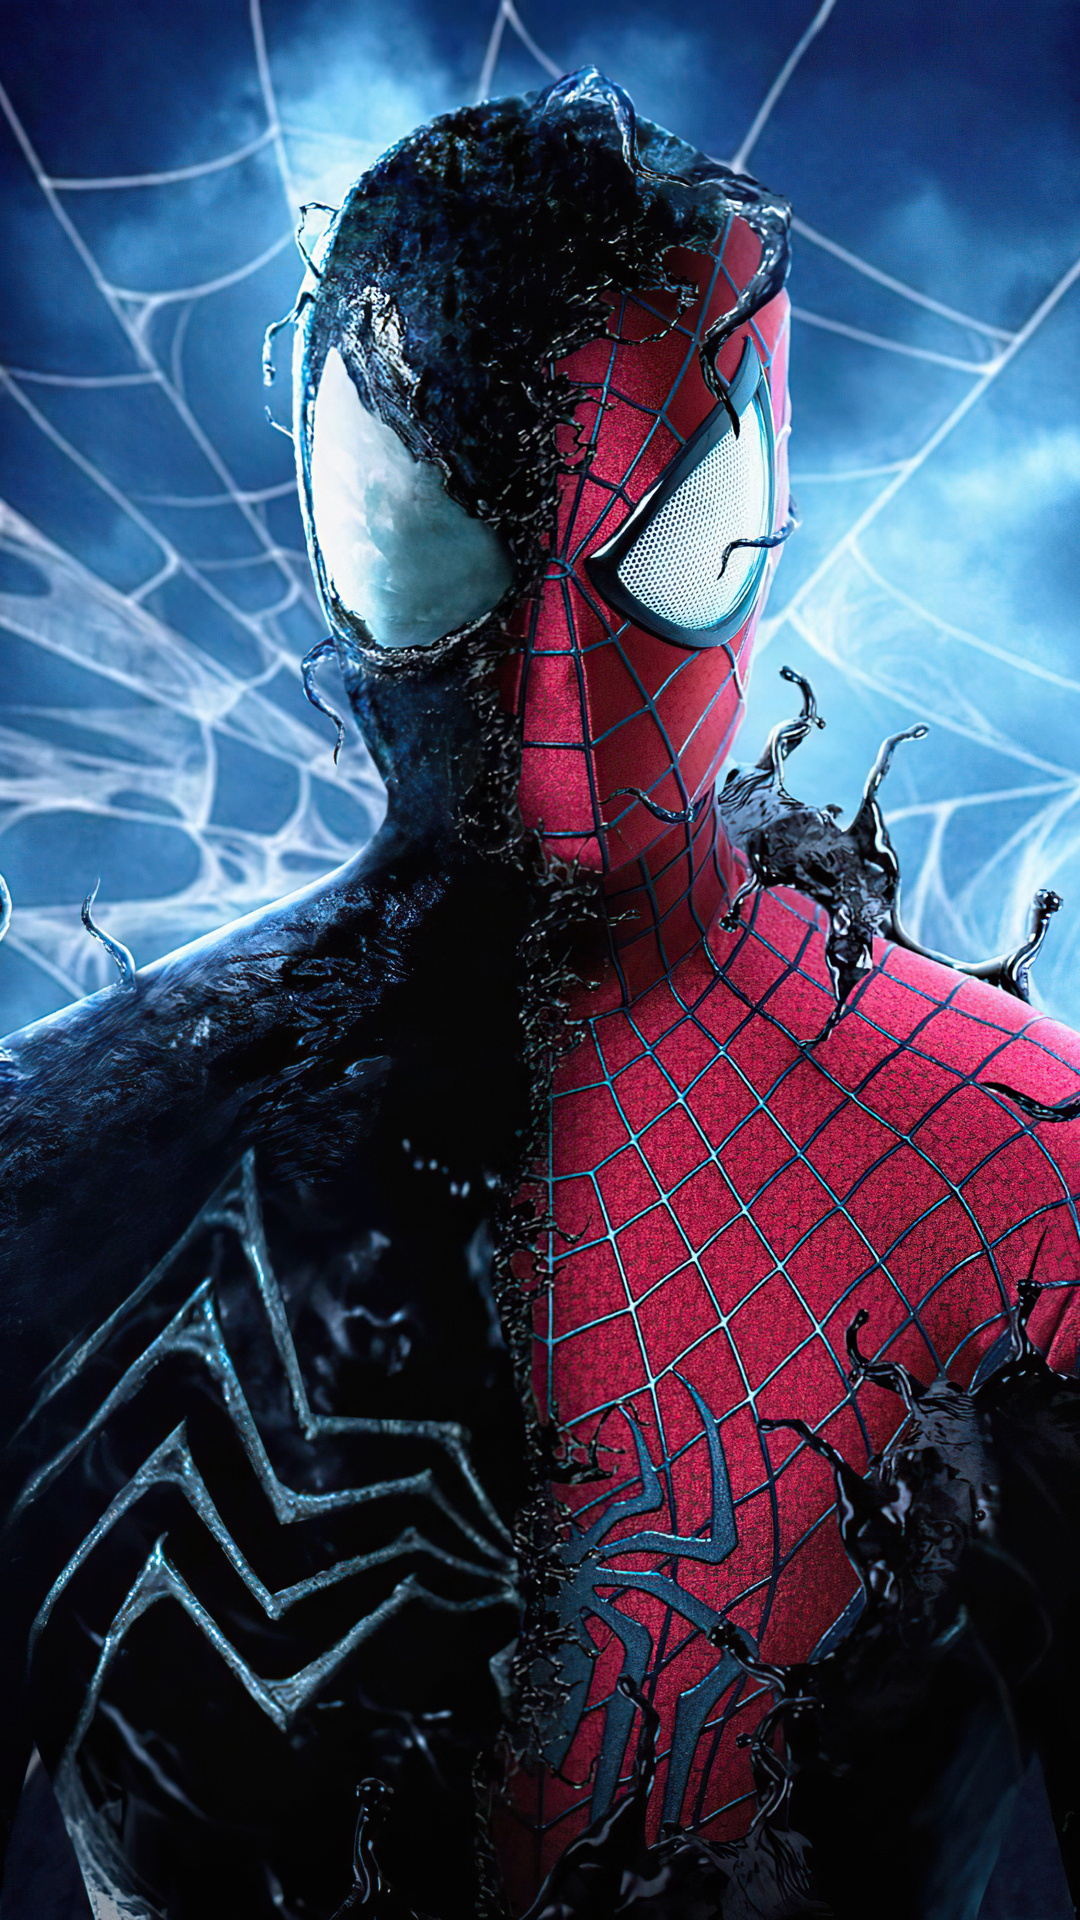 Spider-Man with the symbiote, 4K iPhone 7, HD wallpapers images, 1080x1920 Full HD Phone